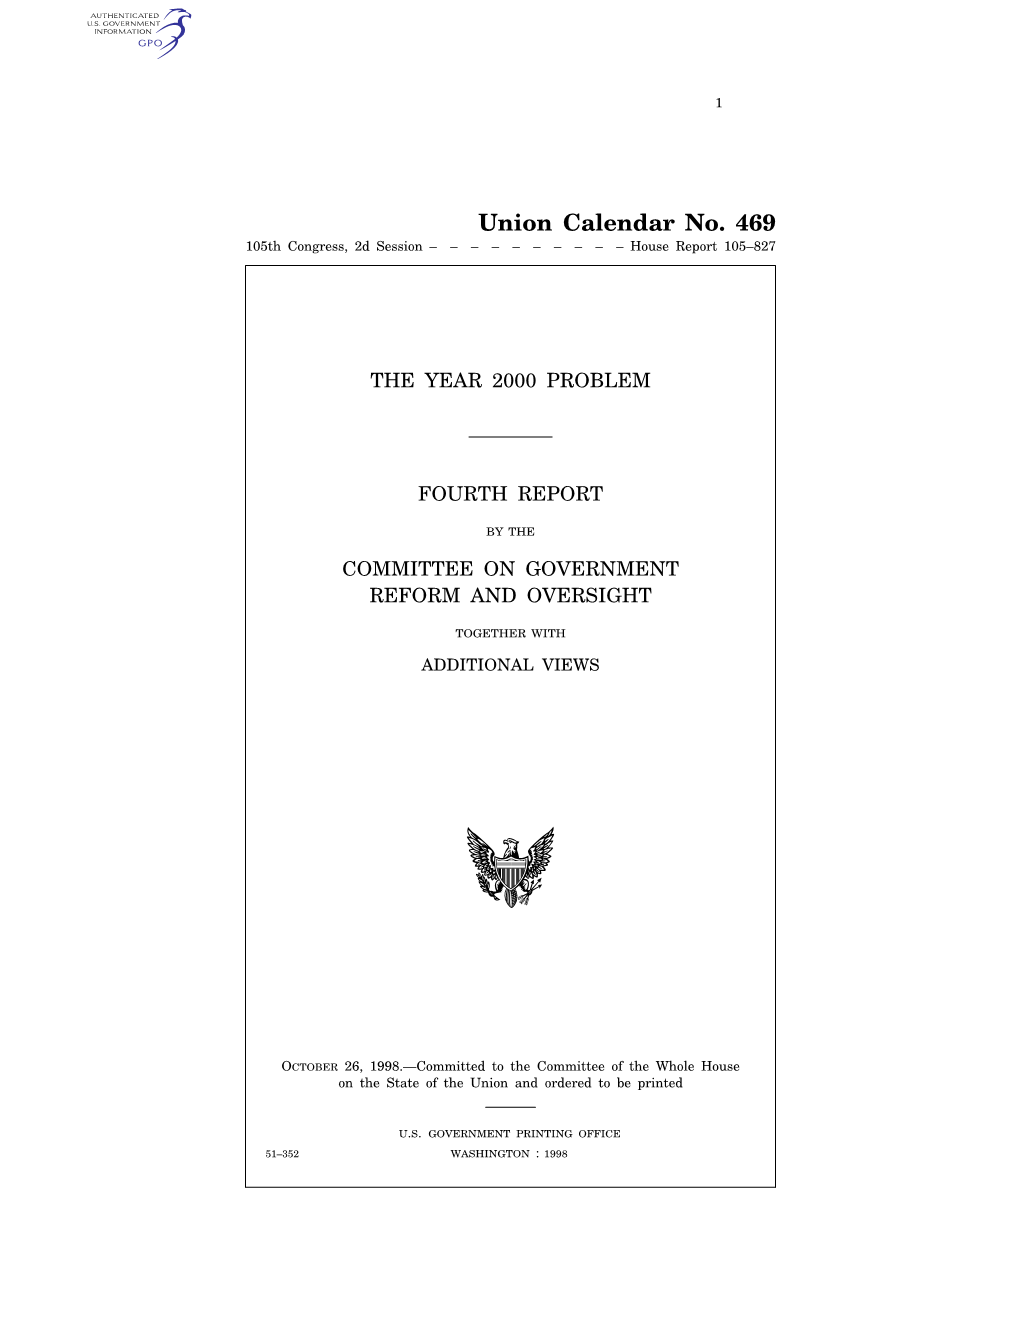 The Year 2000 Problem: Fourth Report by the Committee on Government Reform and Oversight